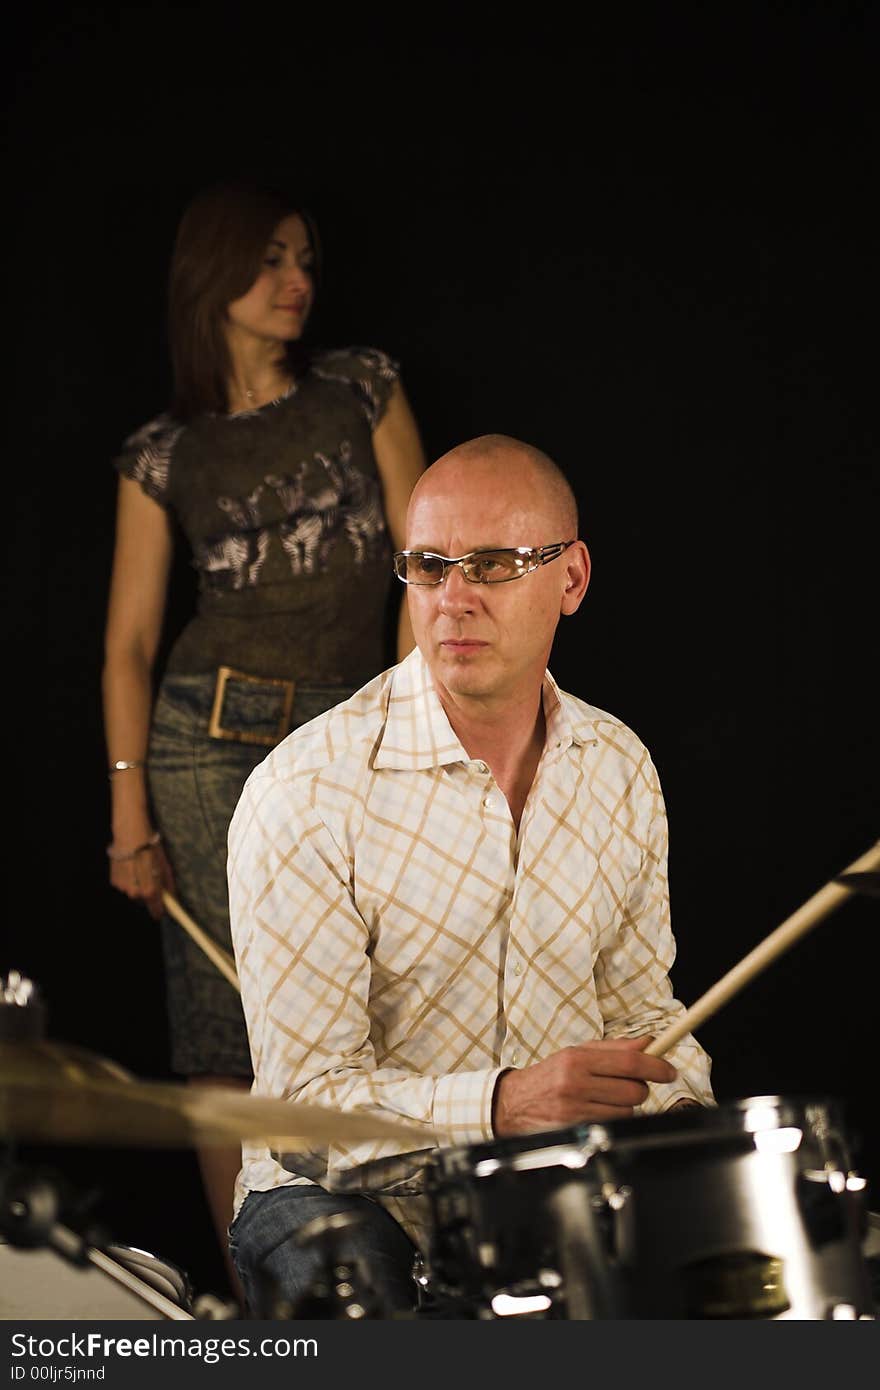 Drummer playing over black backdrop with woman standing in background